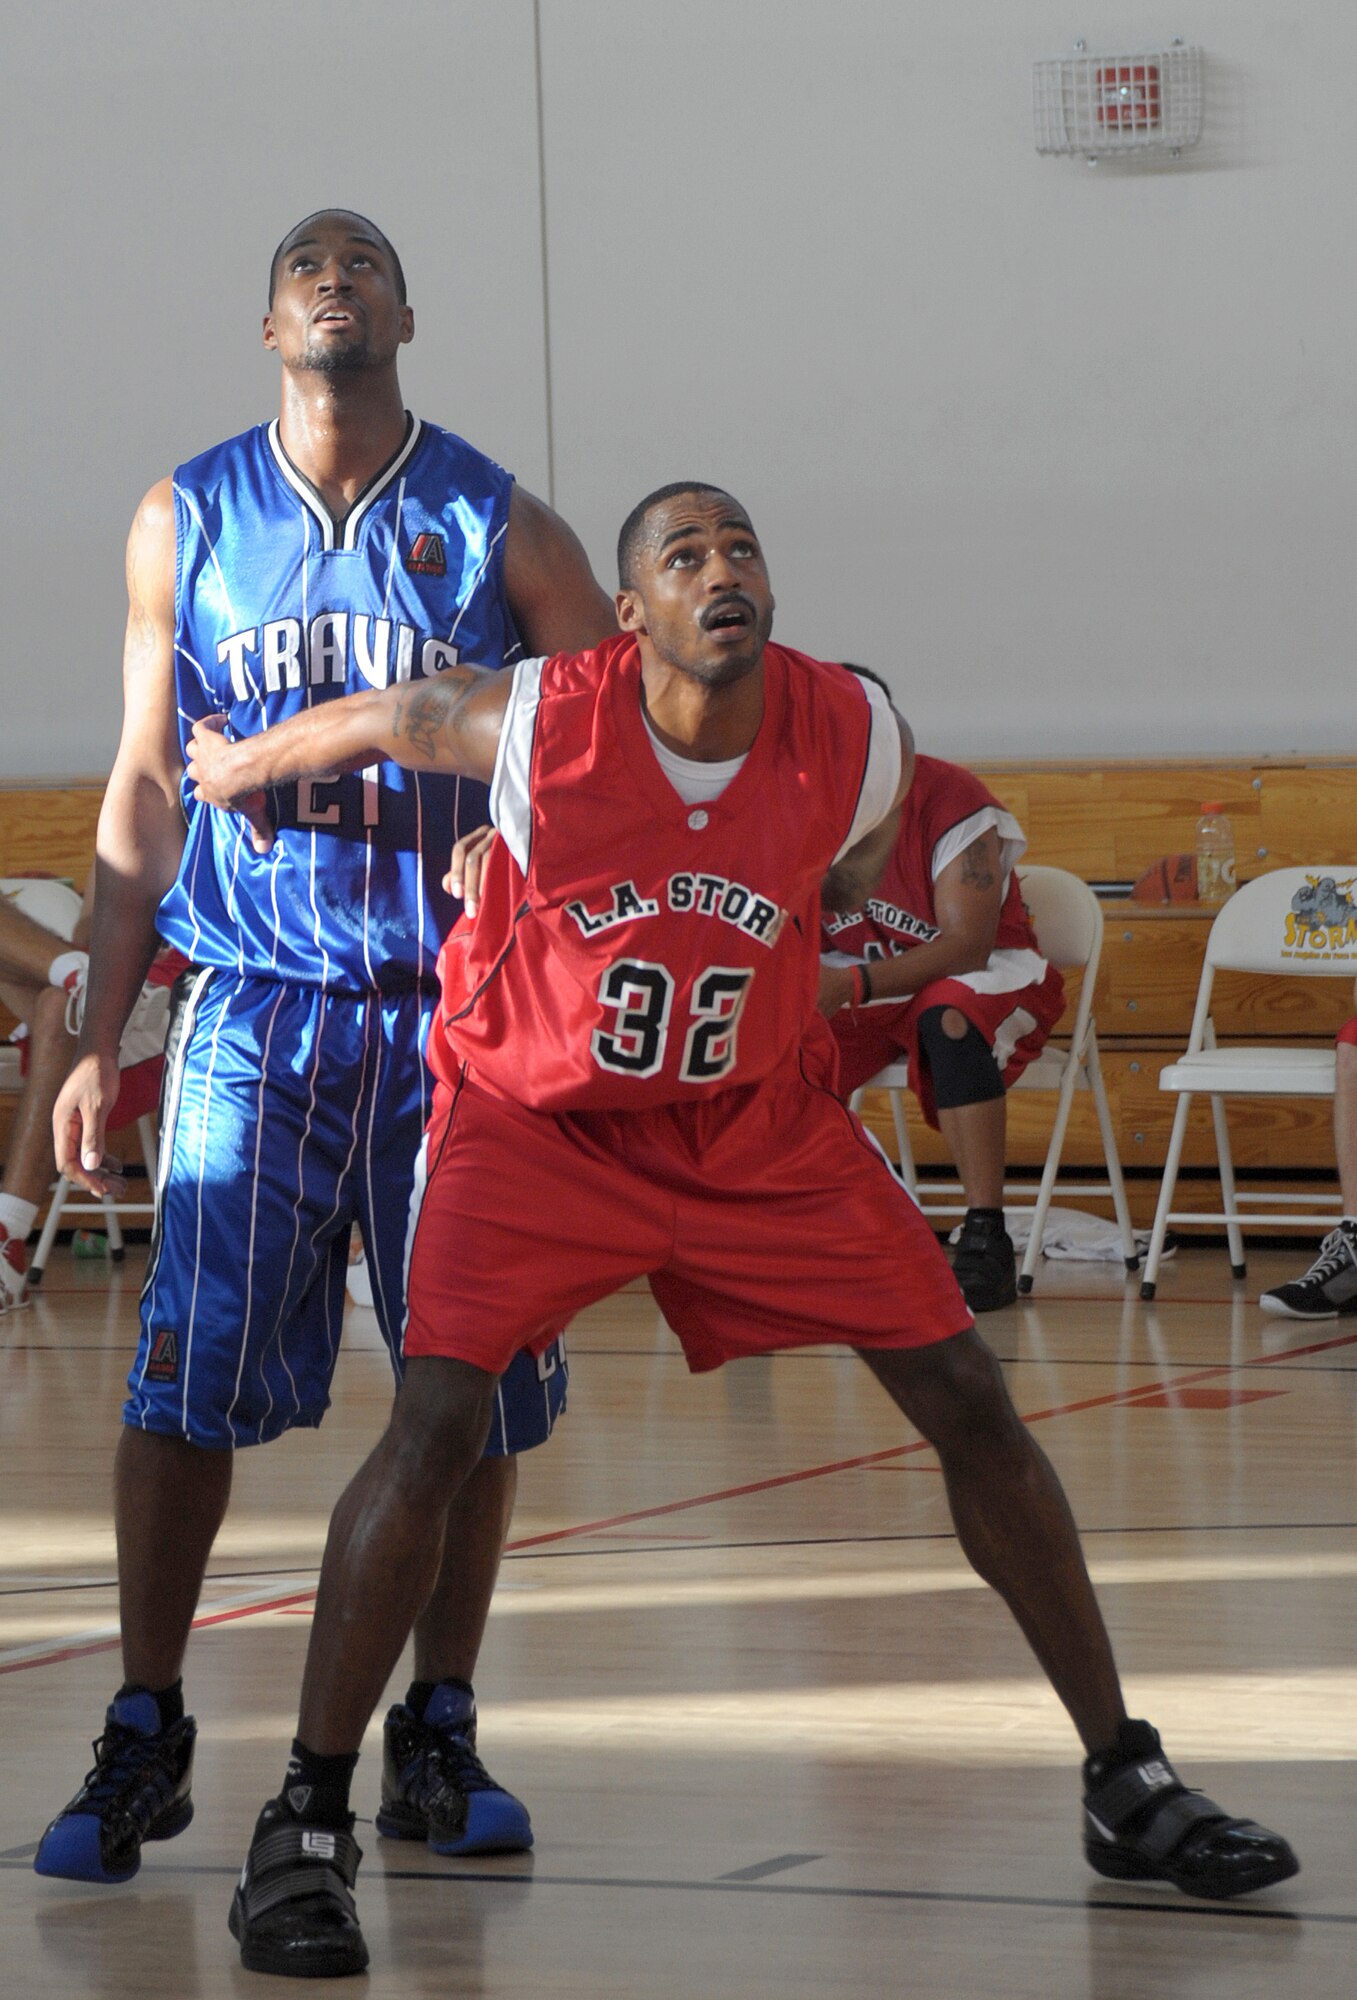 Staff Sgt. Michael Evans (right), Space and Missile Systems Center Safety Office, boxes a defender from Travis Air Force Base during the championship game. Los Angeles AFB sponsored the 2009 Veterans Day "SoCal Shootout" Basketball Tournament on Nov. 7 and 8, which included participation from Luke AFB, Travis AFB, Vandenberg AFB, and Edwards AFB. The LA Storm won the championship title with an 80 to 77 victory over Travis. (Photo by Atiba Copeland)